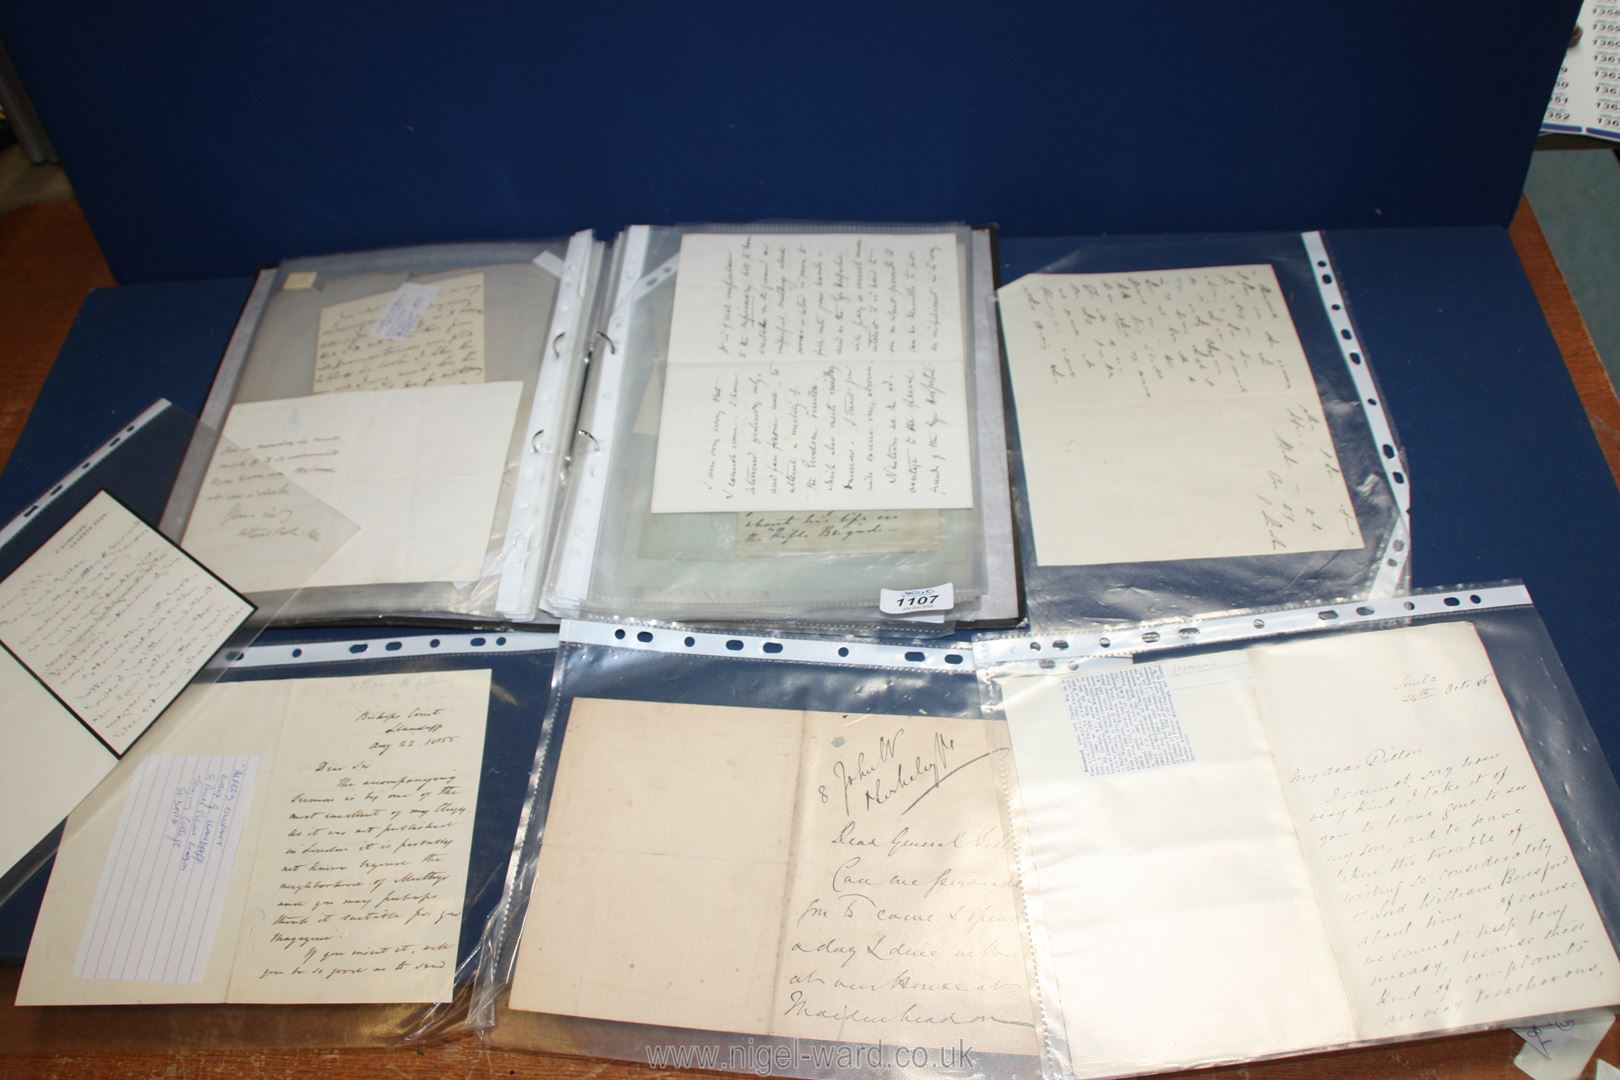 A file of Ephemera from the 1800's, old letters, etc.